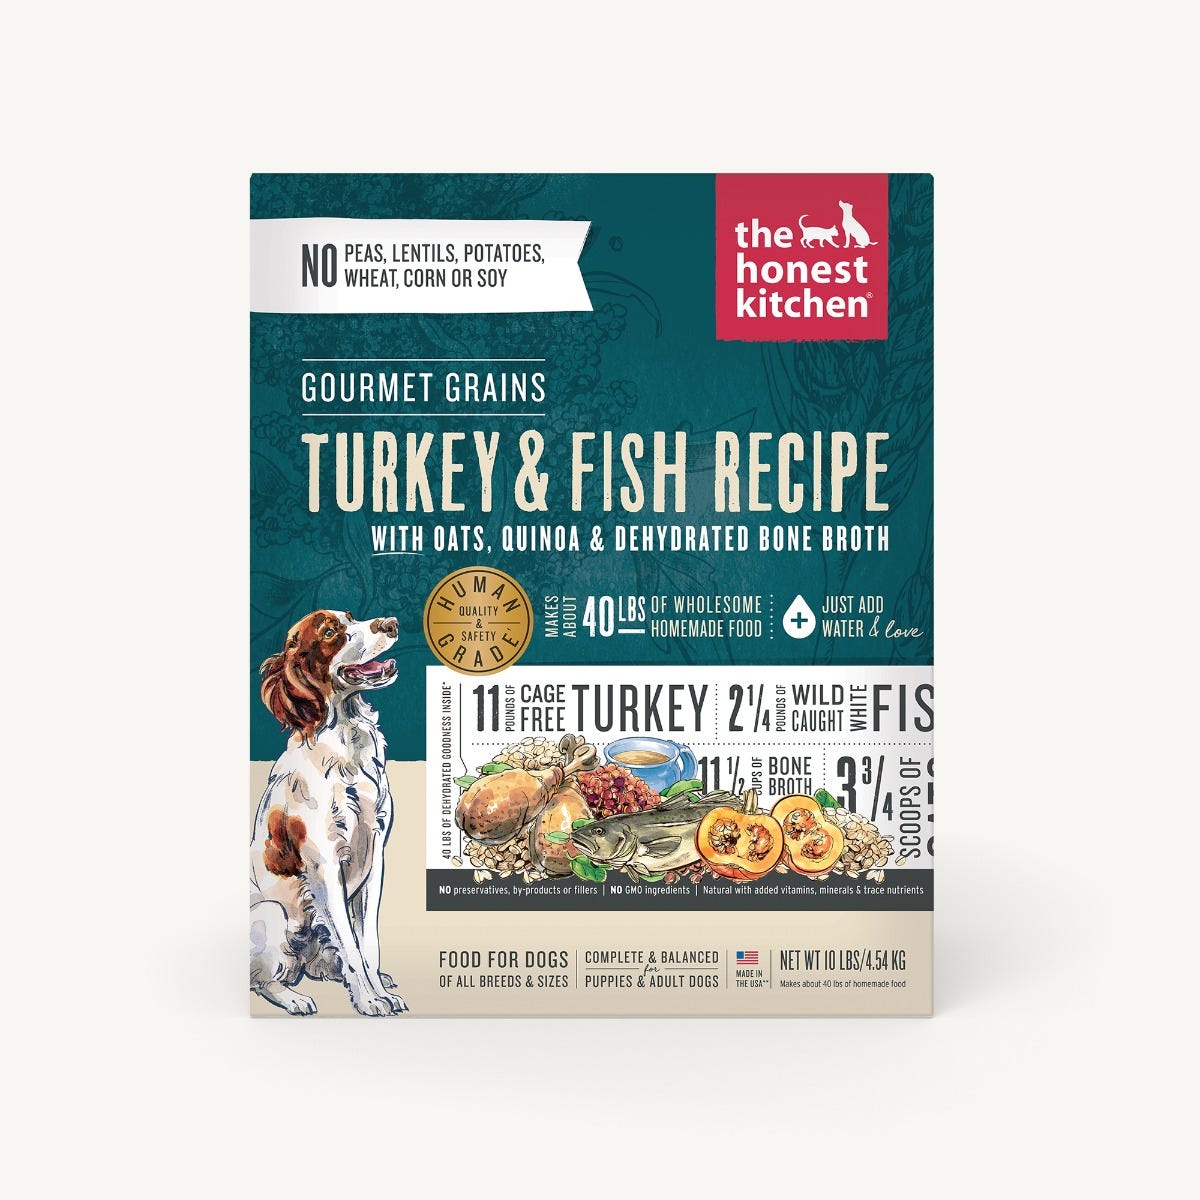 The Honest Kitchen Gourmet Grains Turkey & Fish Recipe with Oats, Quinoa & Dehydrated Bone Broth Dehydrated Dog Food